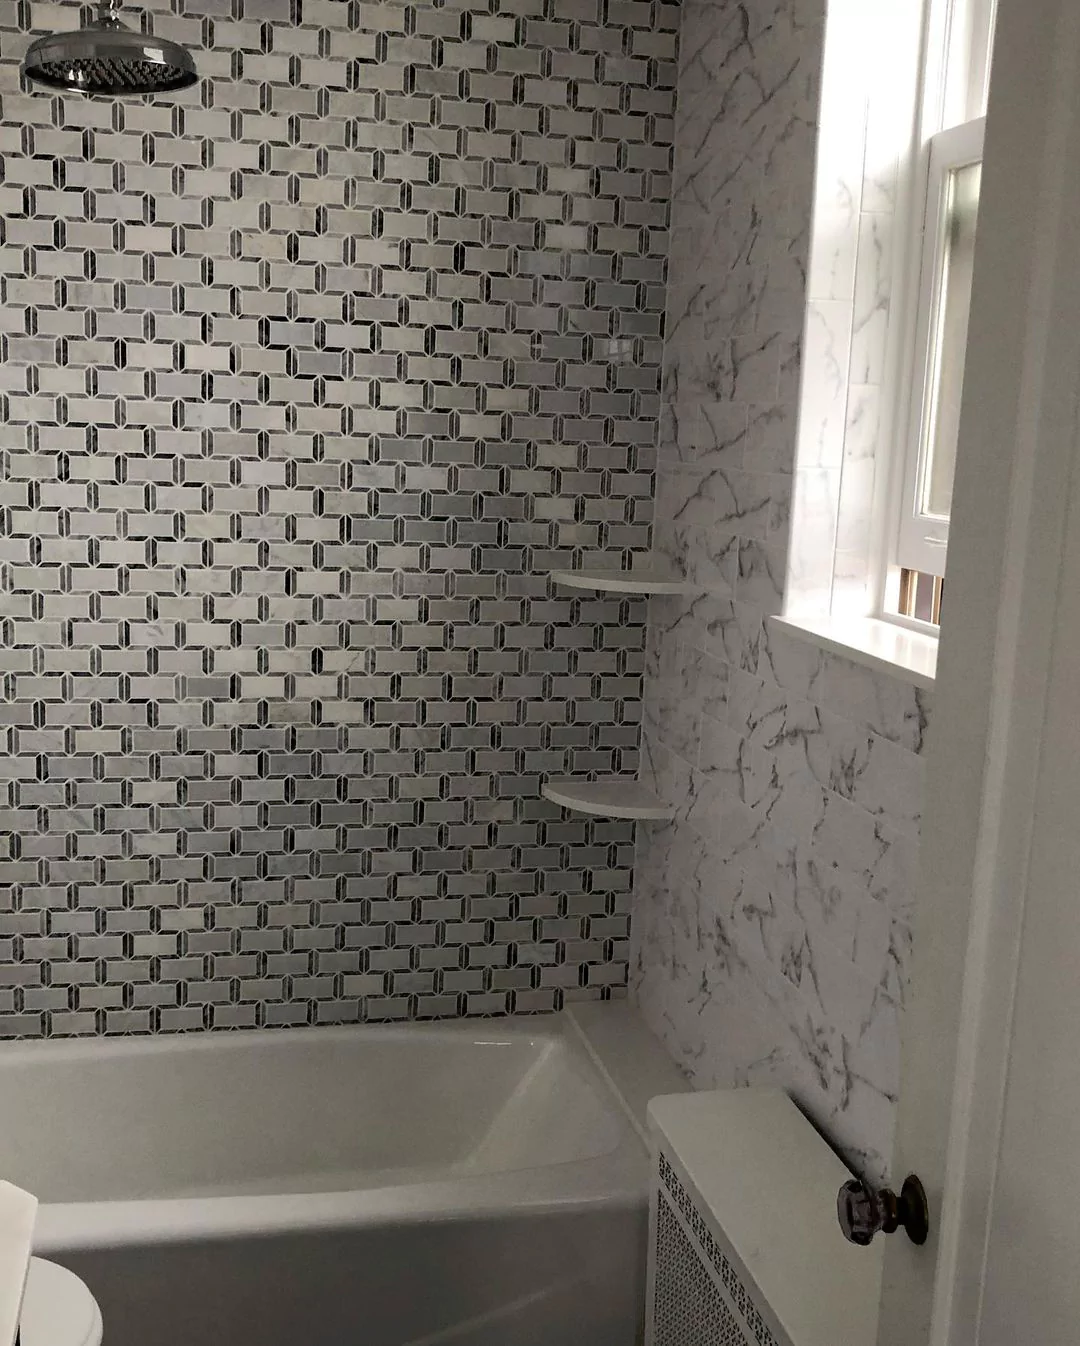 chicagoland remodeling bathroom arlington heights il 1 2